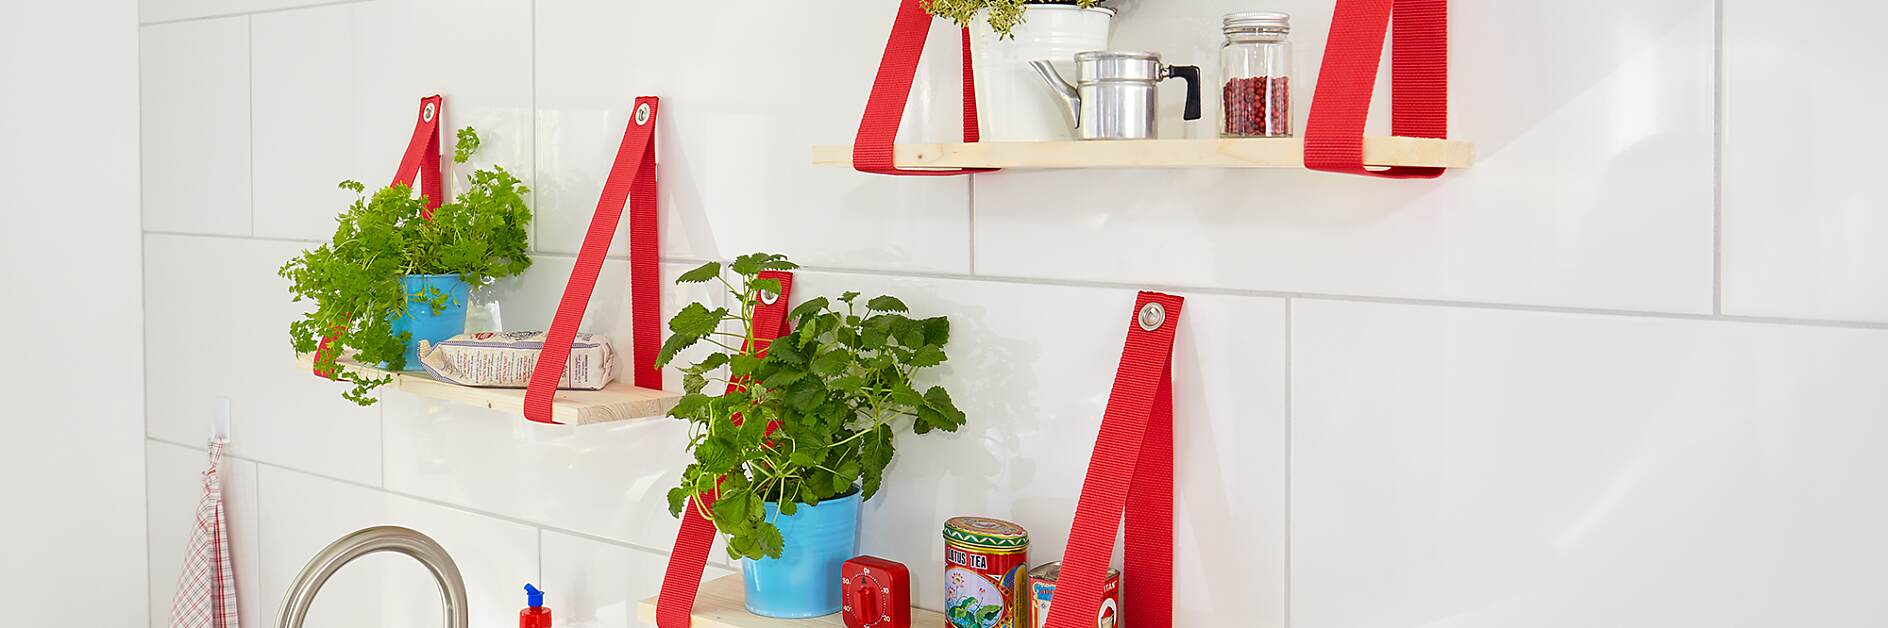 Make a place for herbs in your kitchen